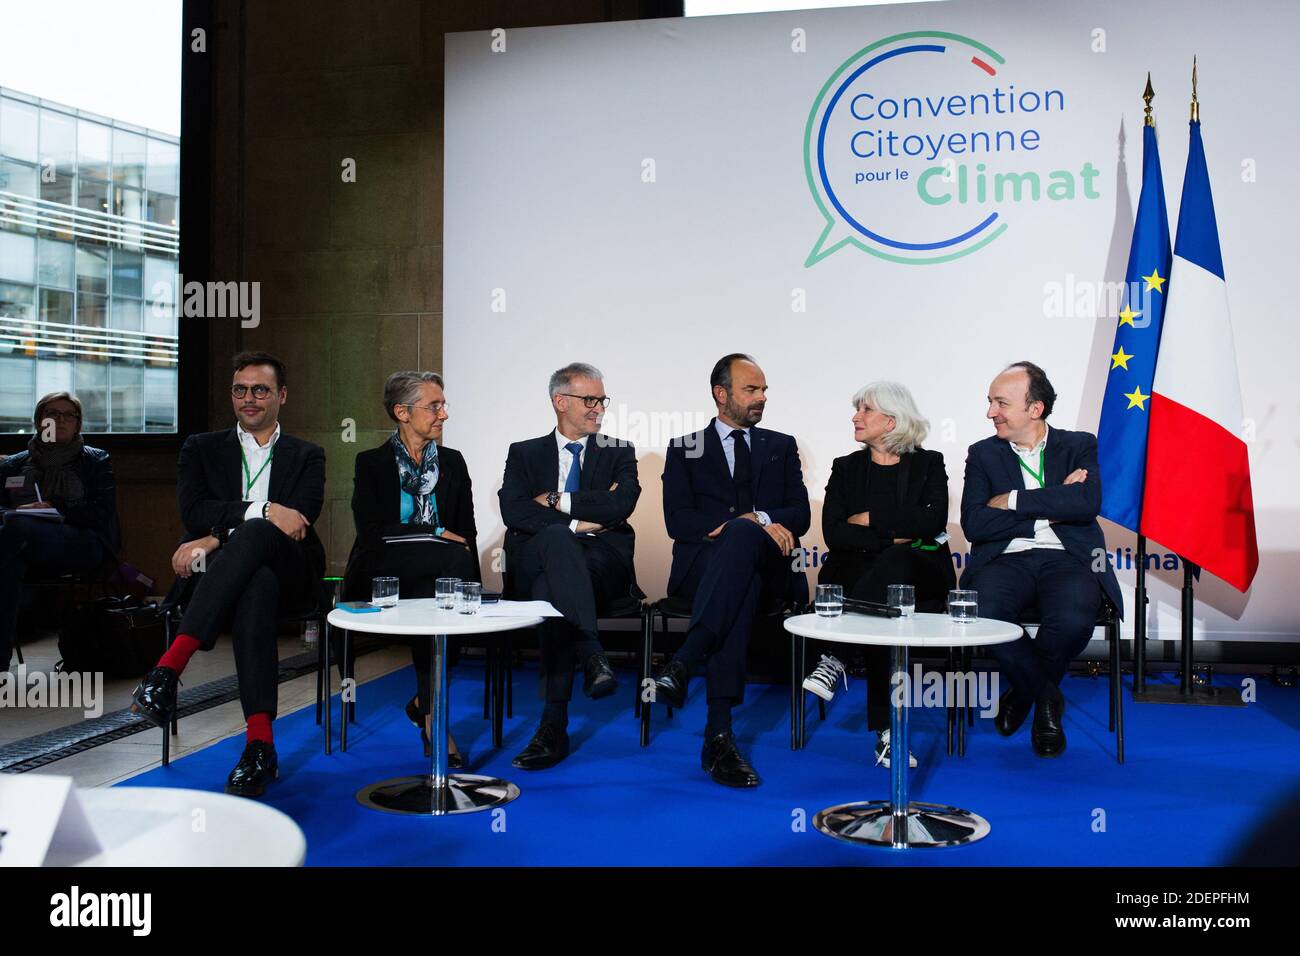 Fench Prime Minister Edouard Philippe, Economist Laurence Tubiana, French Minister for the Ecological and Inclusive Transition Elisabeth Borne, president of the CESE Patrick Bernasconi and Thierry Pech at the Citizens' Convention for Climate held at the French Conseil economique, social et environnemental (CESE - Economic, Social and Environmental Council) in Paris, 04 October 2019 Photo by Raphaël Lafargue/ABACAPRESS.COM Stock Photo